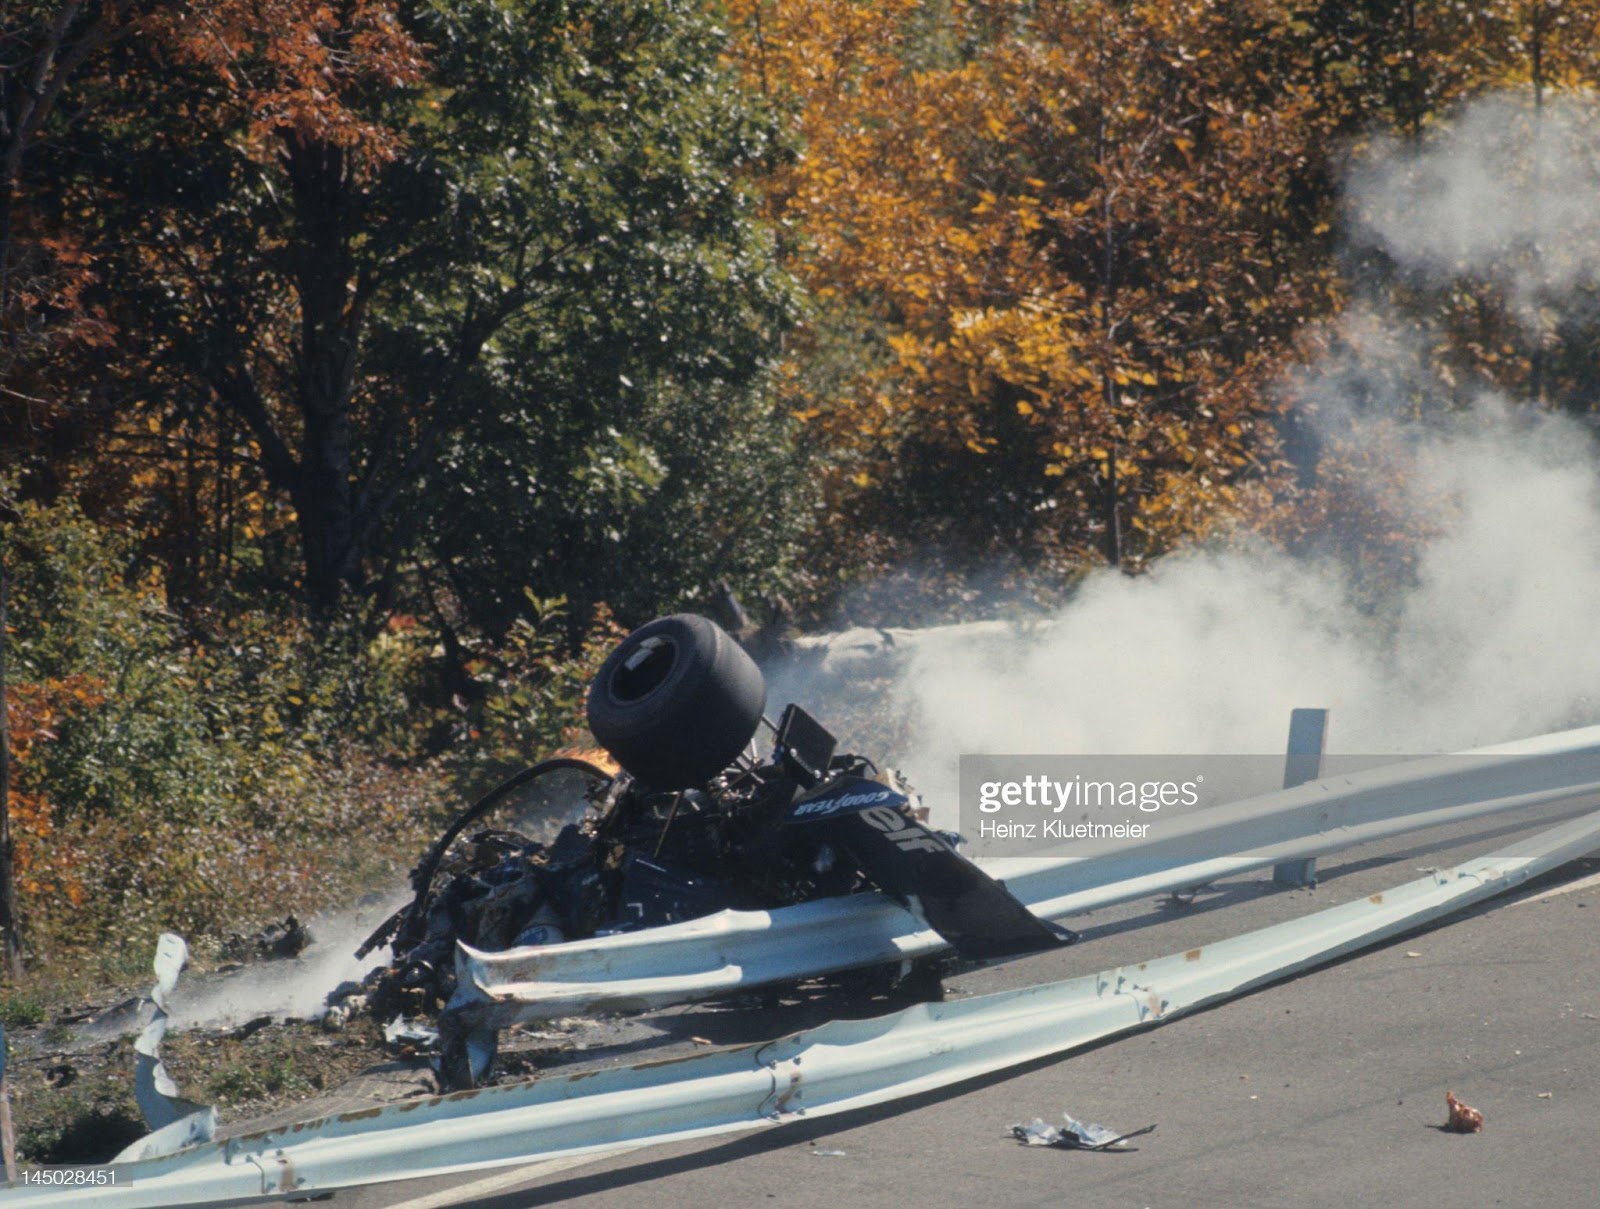 Overall view of guardrail collision that killed Francois Cevert (6) during Saturday morning trials session at Watkins Glen Grand Prix Race Course.